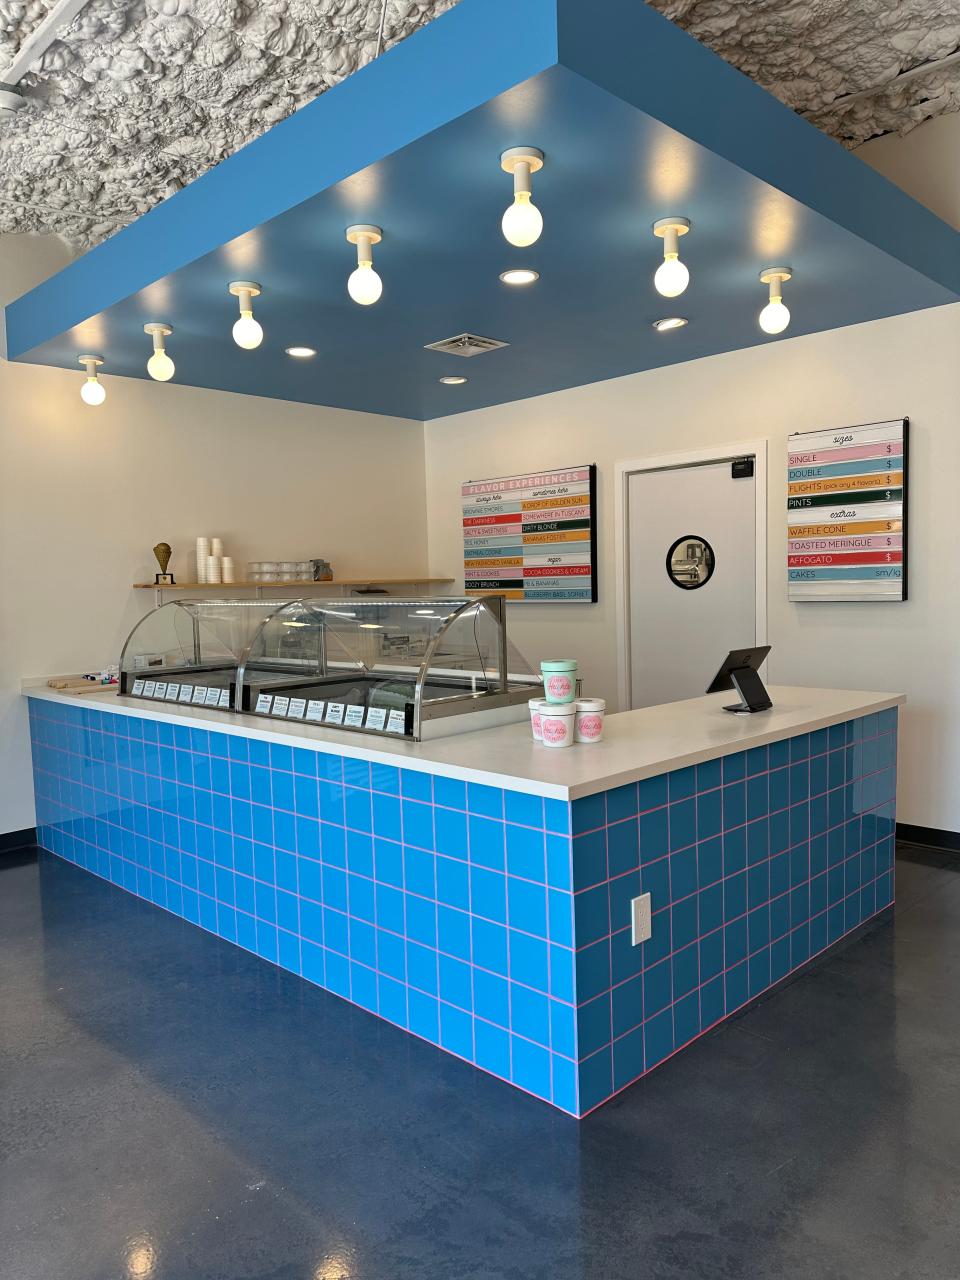 Ice cream shop Great Heights Creamery is now open in Sarasota's Rosemary District. It is a brick-and-mortar location for Great Heights Creamery, which previously operated as an ice cream cart that would appear at local farmers markets.